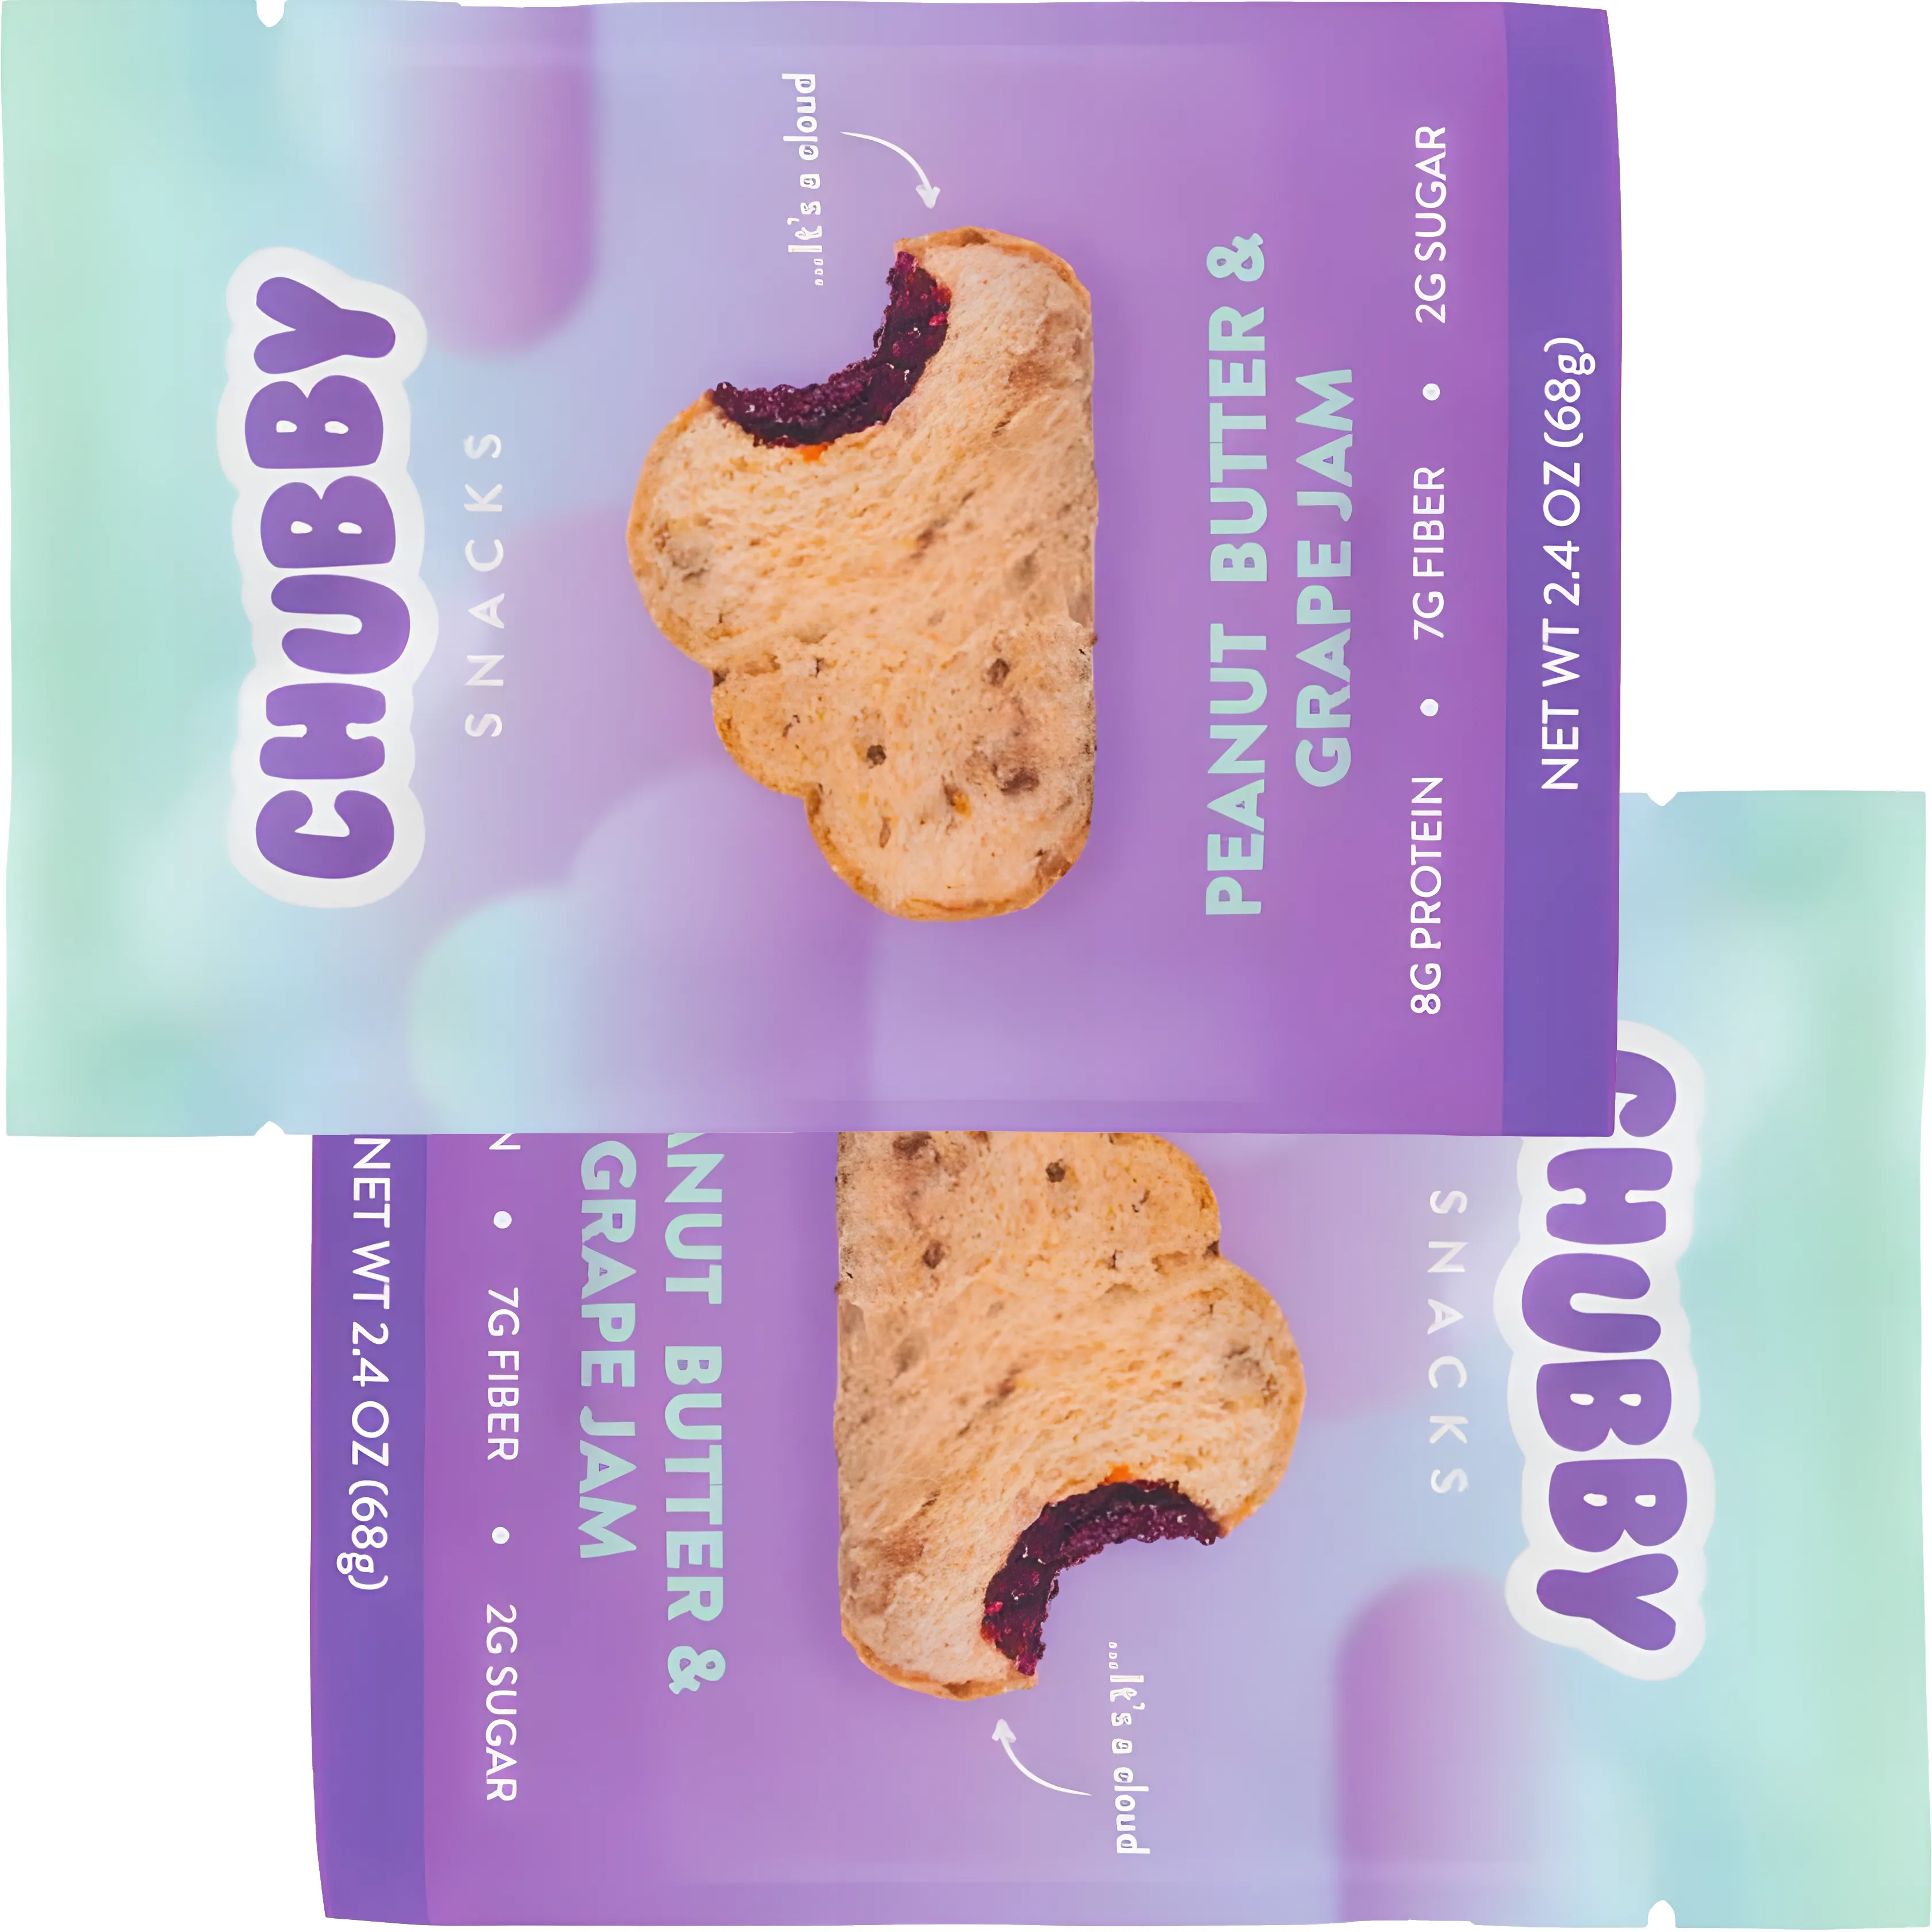 Free Chubby Snacks After Rebate